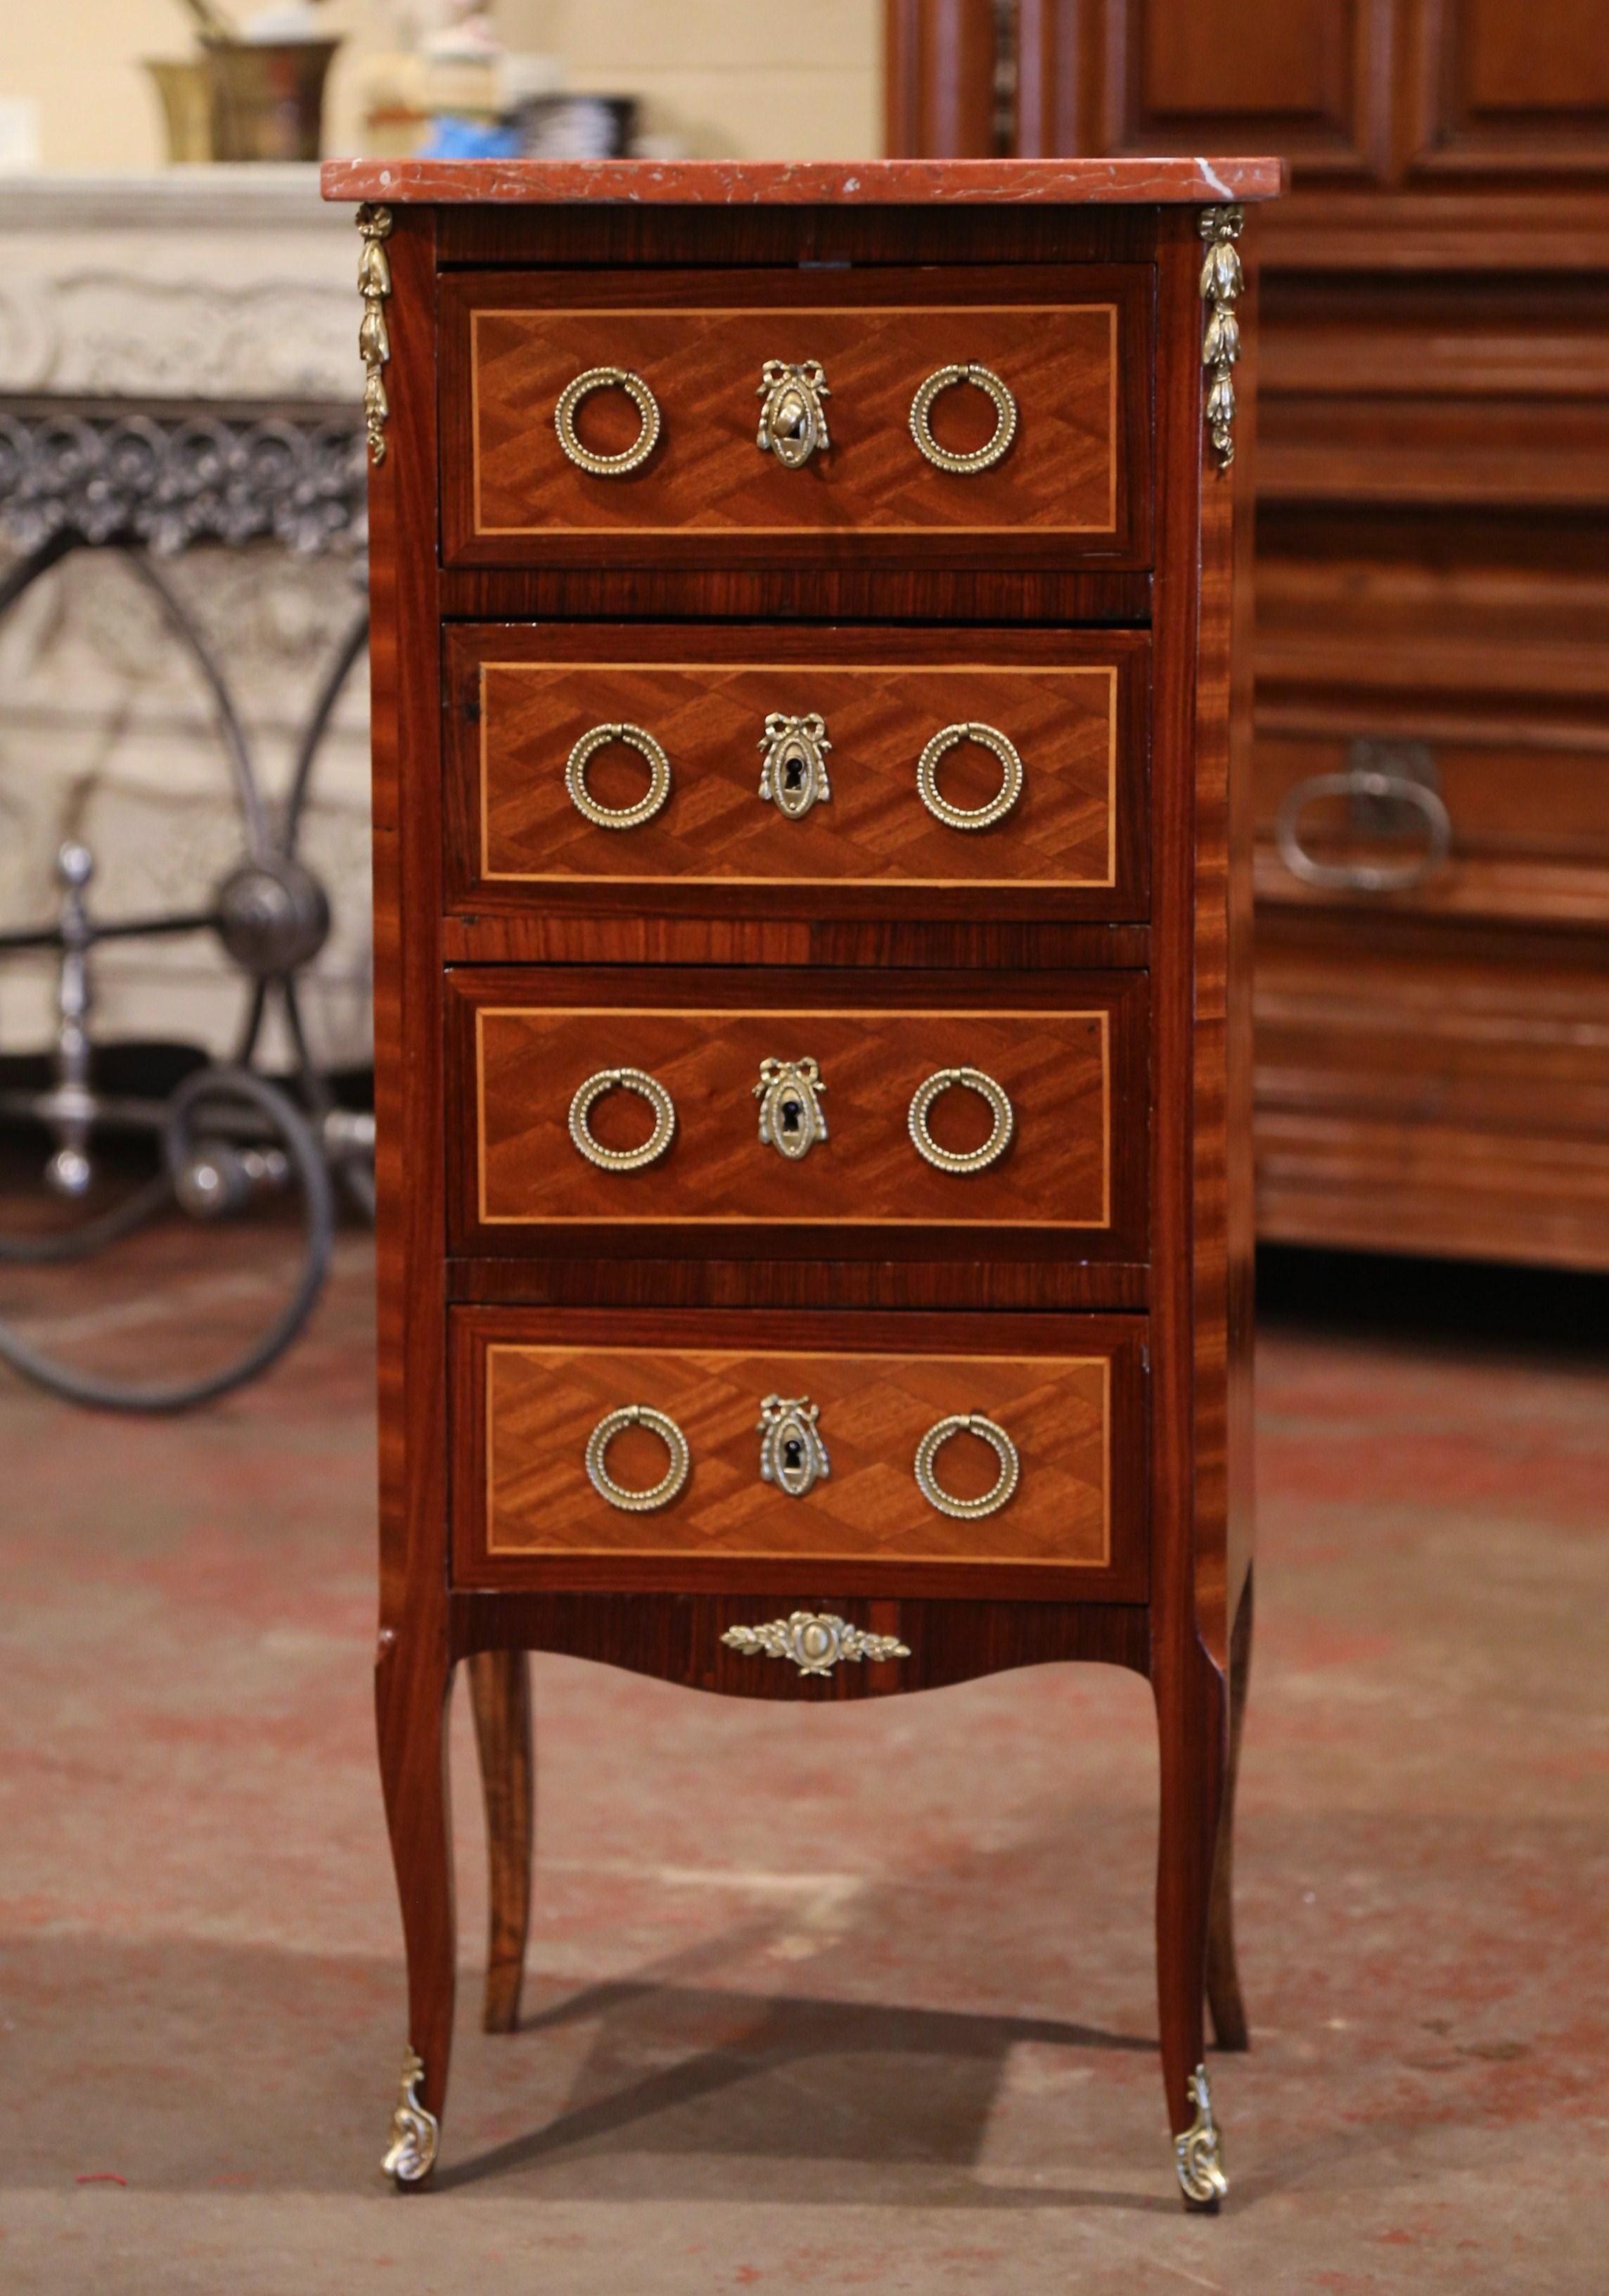 This elegant fruitwood antique commode was crafted in Paris, circa 1920. Versatile, the rectangular petite cabinet could be used as a small storage cabinet in a powder room. The commode sits on cabriole legs with mounts over the feet over a